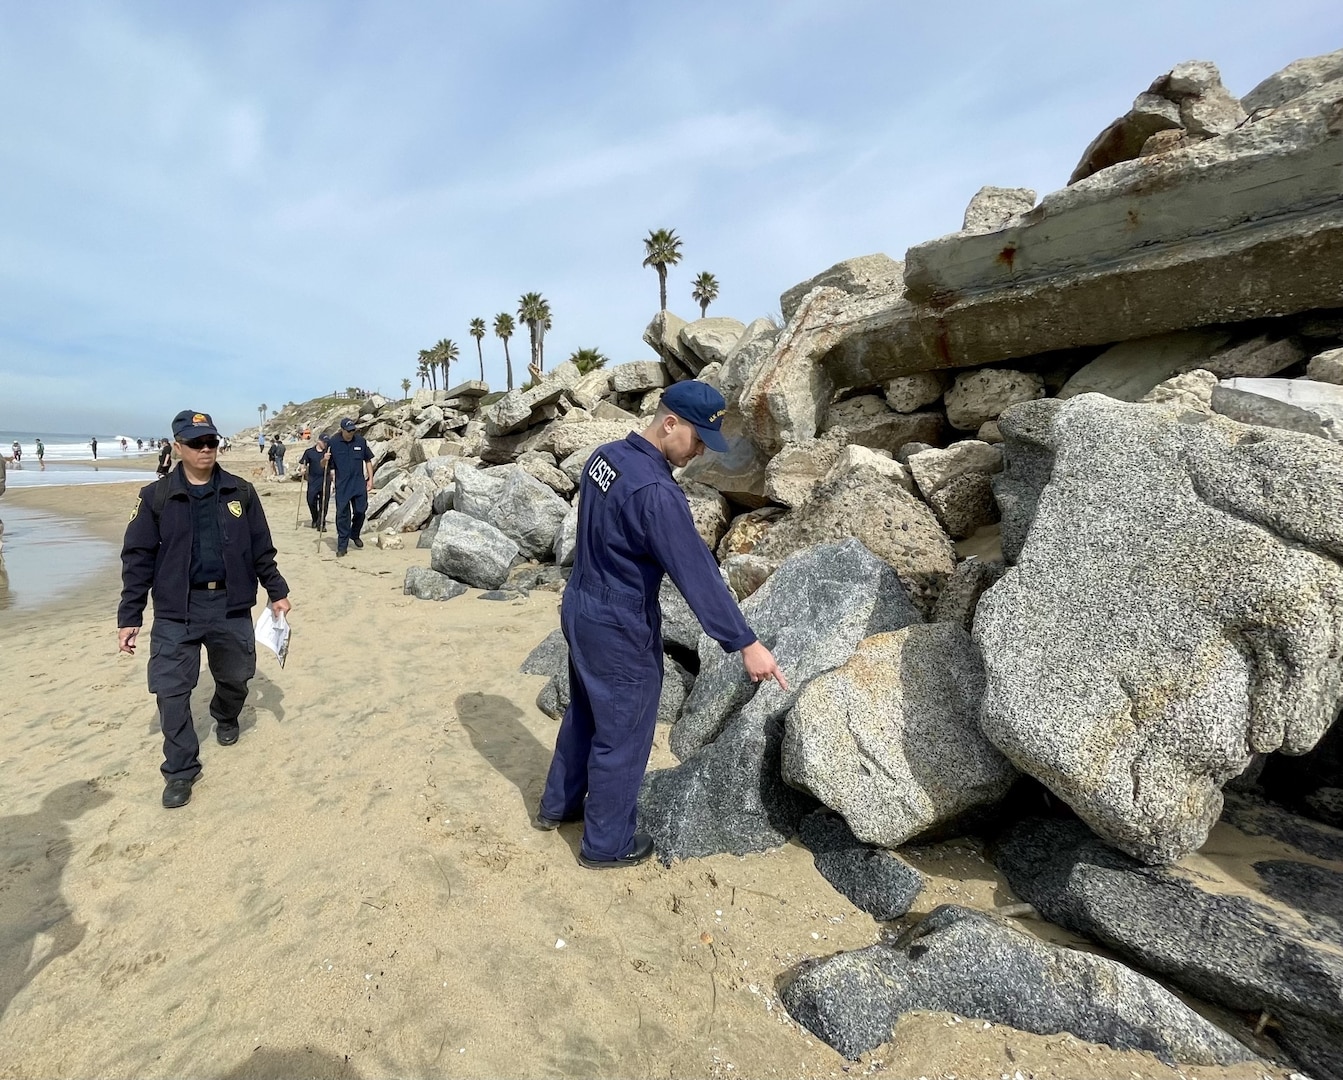 Unified Command has concluded the response Monday to an oil sheen that was observed offshore of Huntington Beach.
Over the weekend cleanup crews recovered approximately 85 gallons of product from offshore recovery efforts and removed roughly 1,050 pounds of oily waste/sand and tar balls from the shoreline. Official quantification of product collected throughout the response is ongoing.